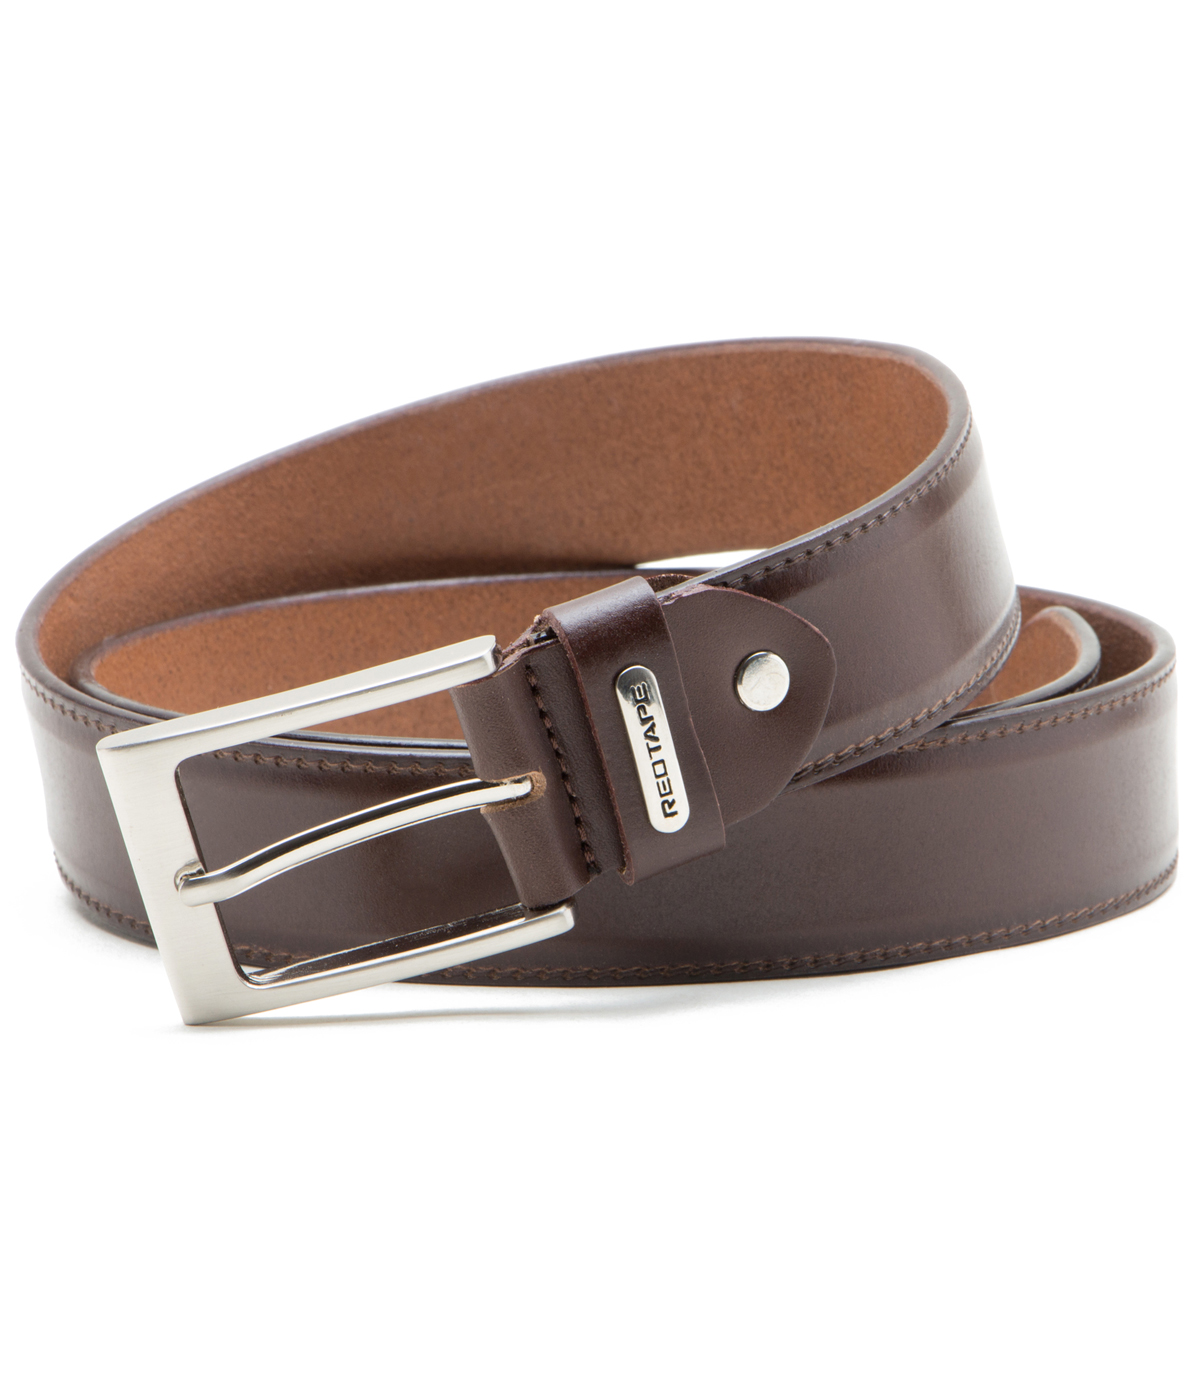 Buy Red Tape Brown Leather Belt for Men RBL182 Online @ ₹1195 from ...